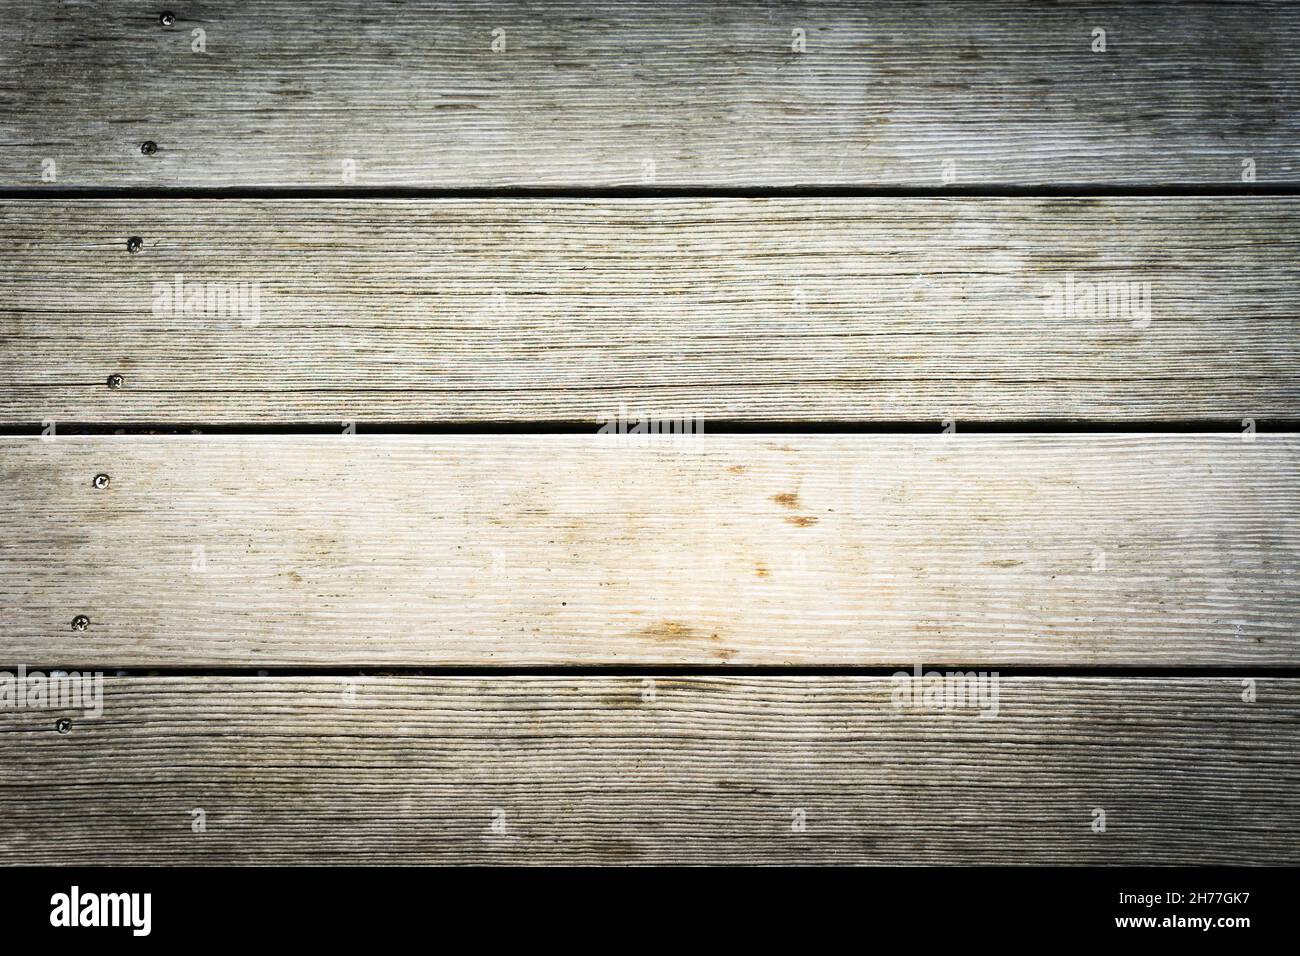 Wooden planks placed horizontally with lots of texture and light tones. Background concept. Stock Photo